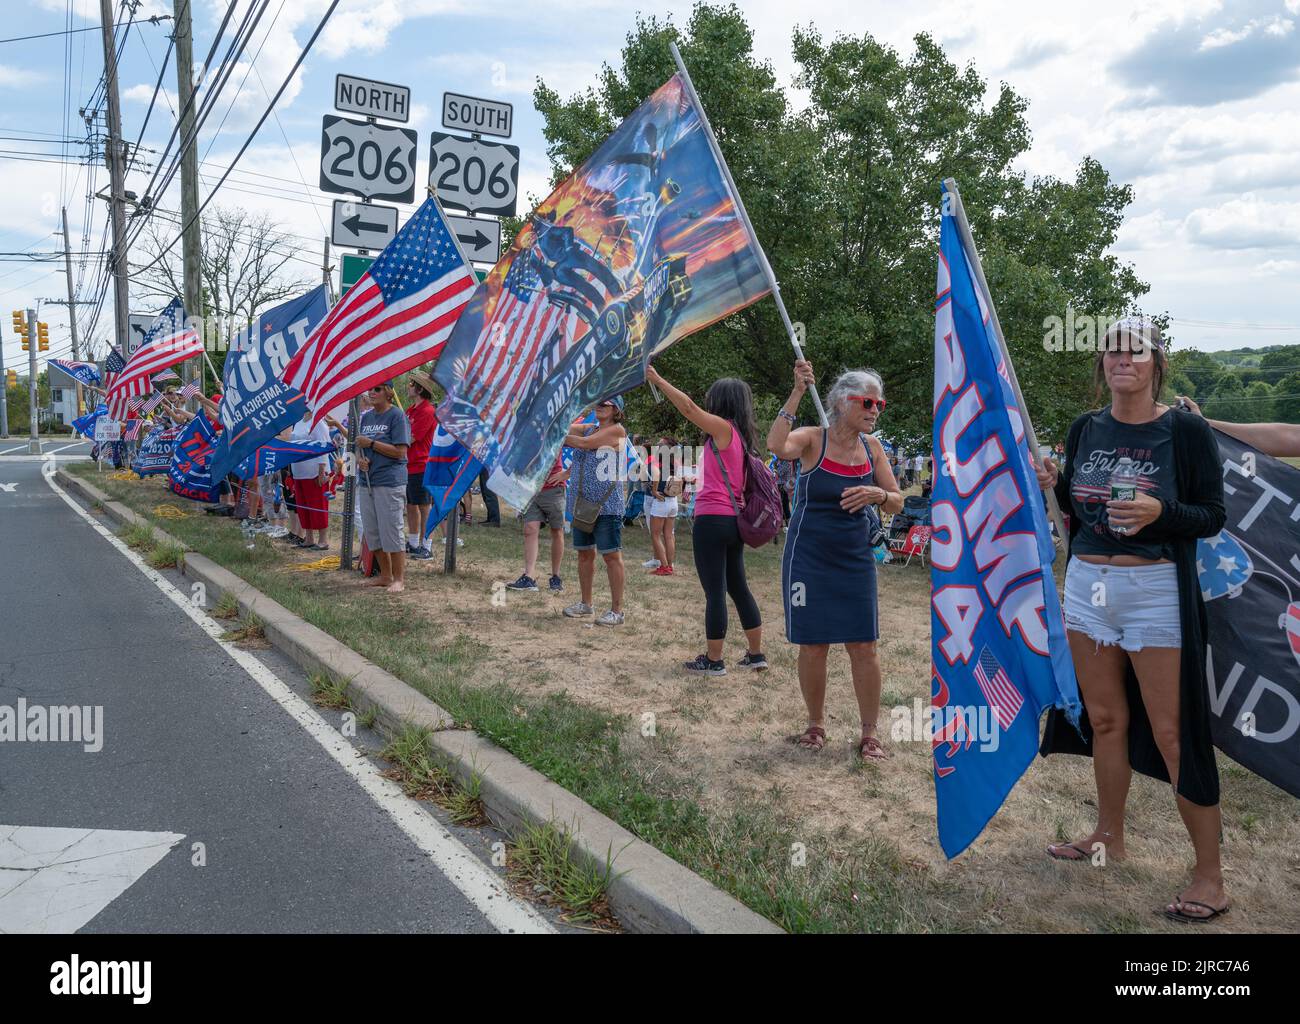 BEDMINSTER, N.J. – August 14, 2022: Demonstrators rally during a ‘Stand with Trump’ event near Trump National Golf Club Bedminster. Stock Photo